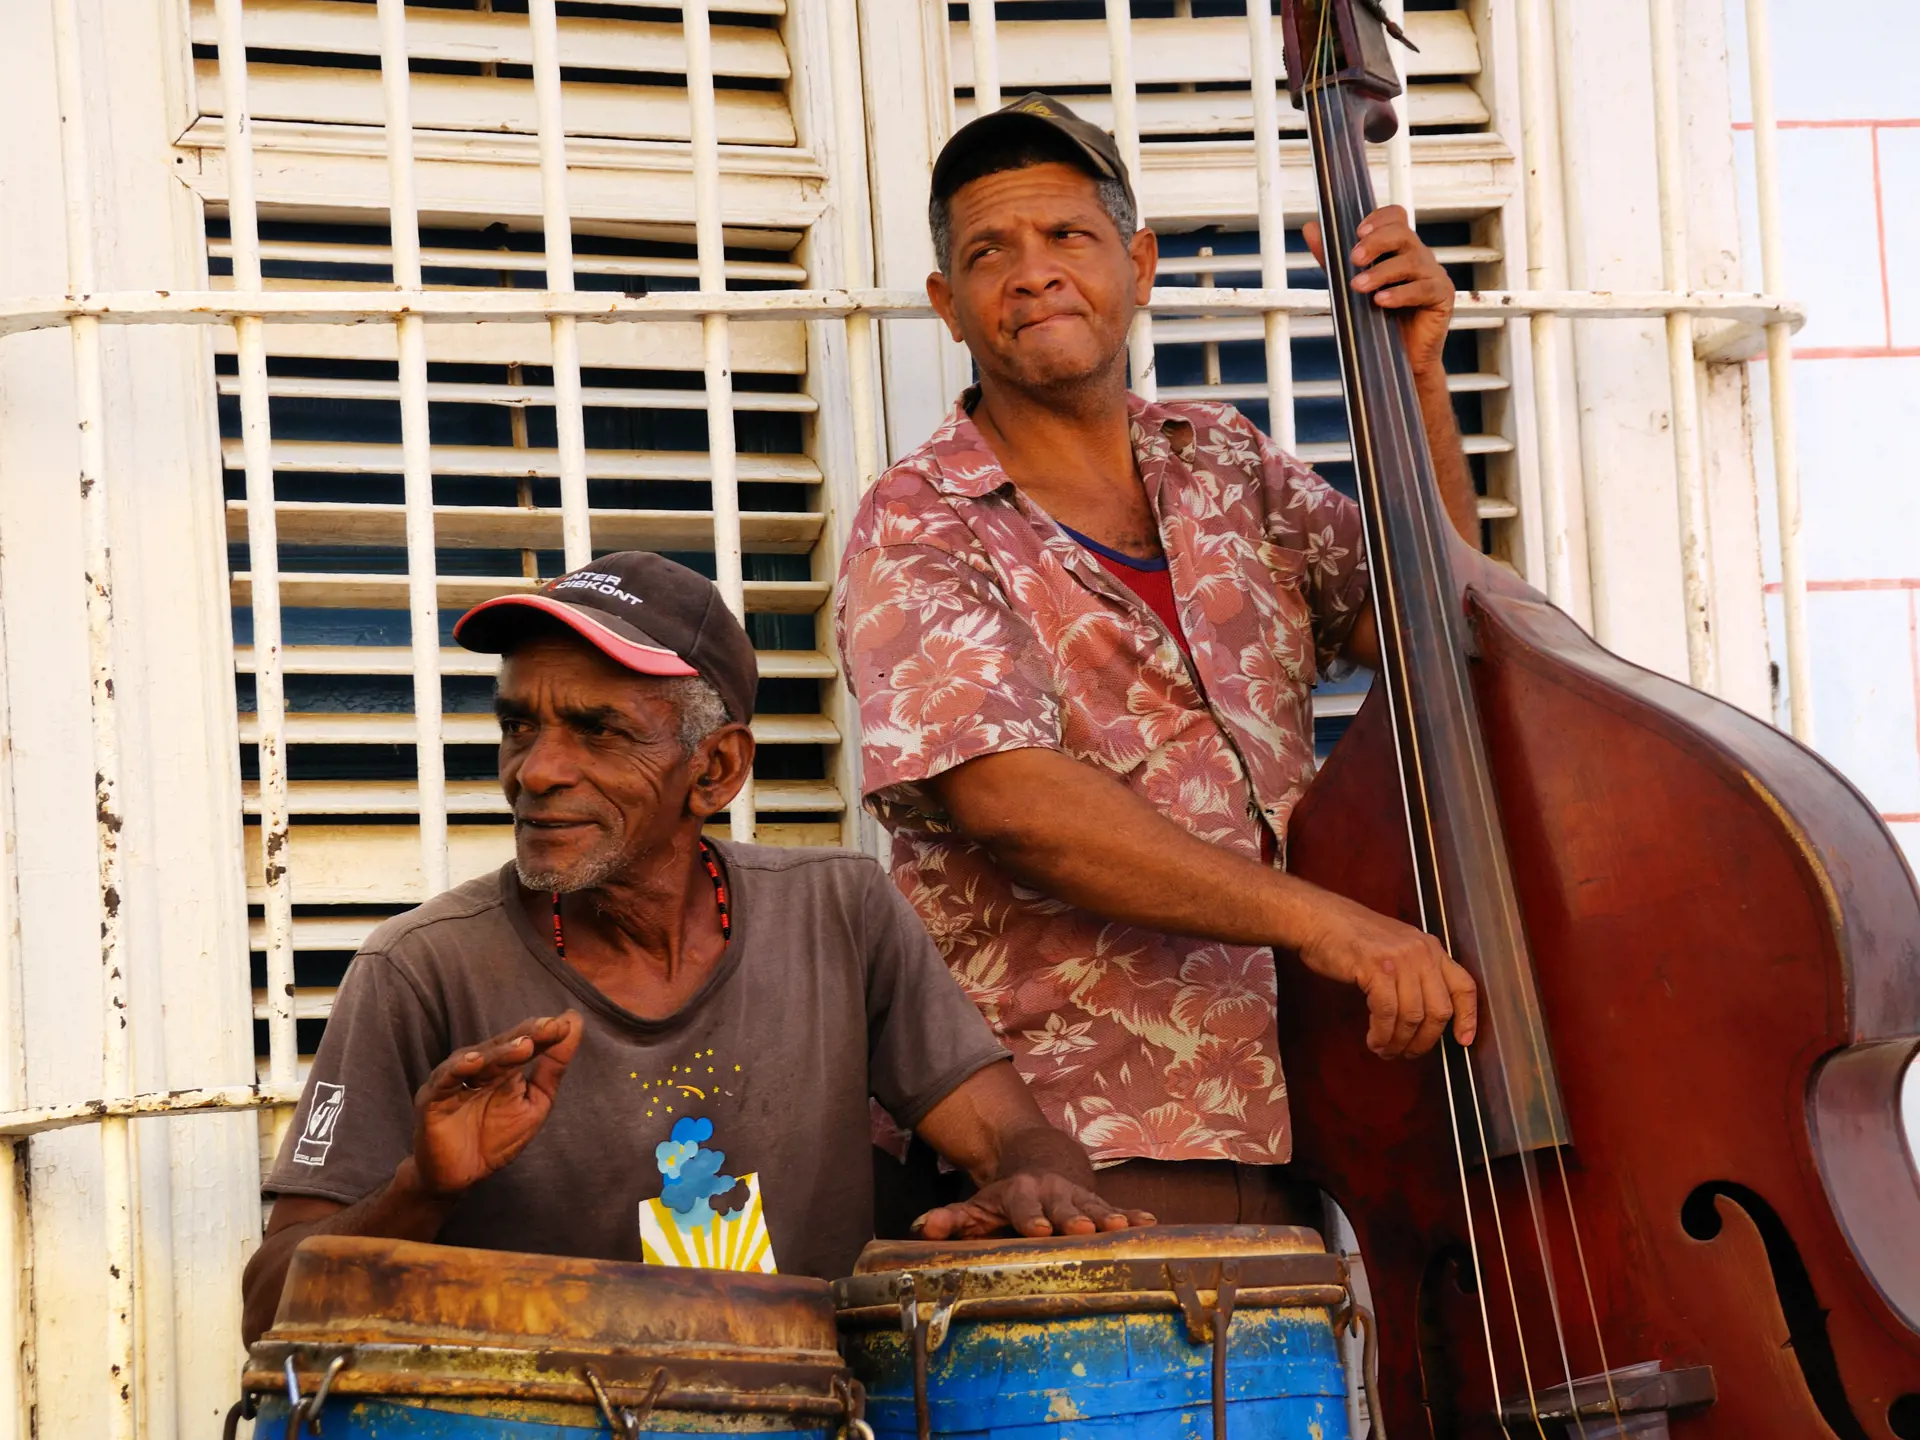 Traditional musicians playing in the streets of Trinidad.jpg